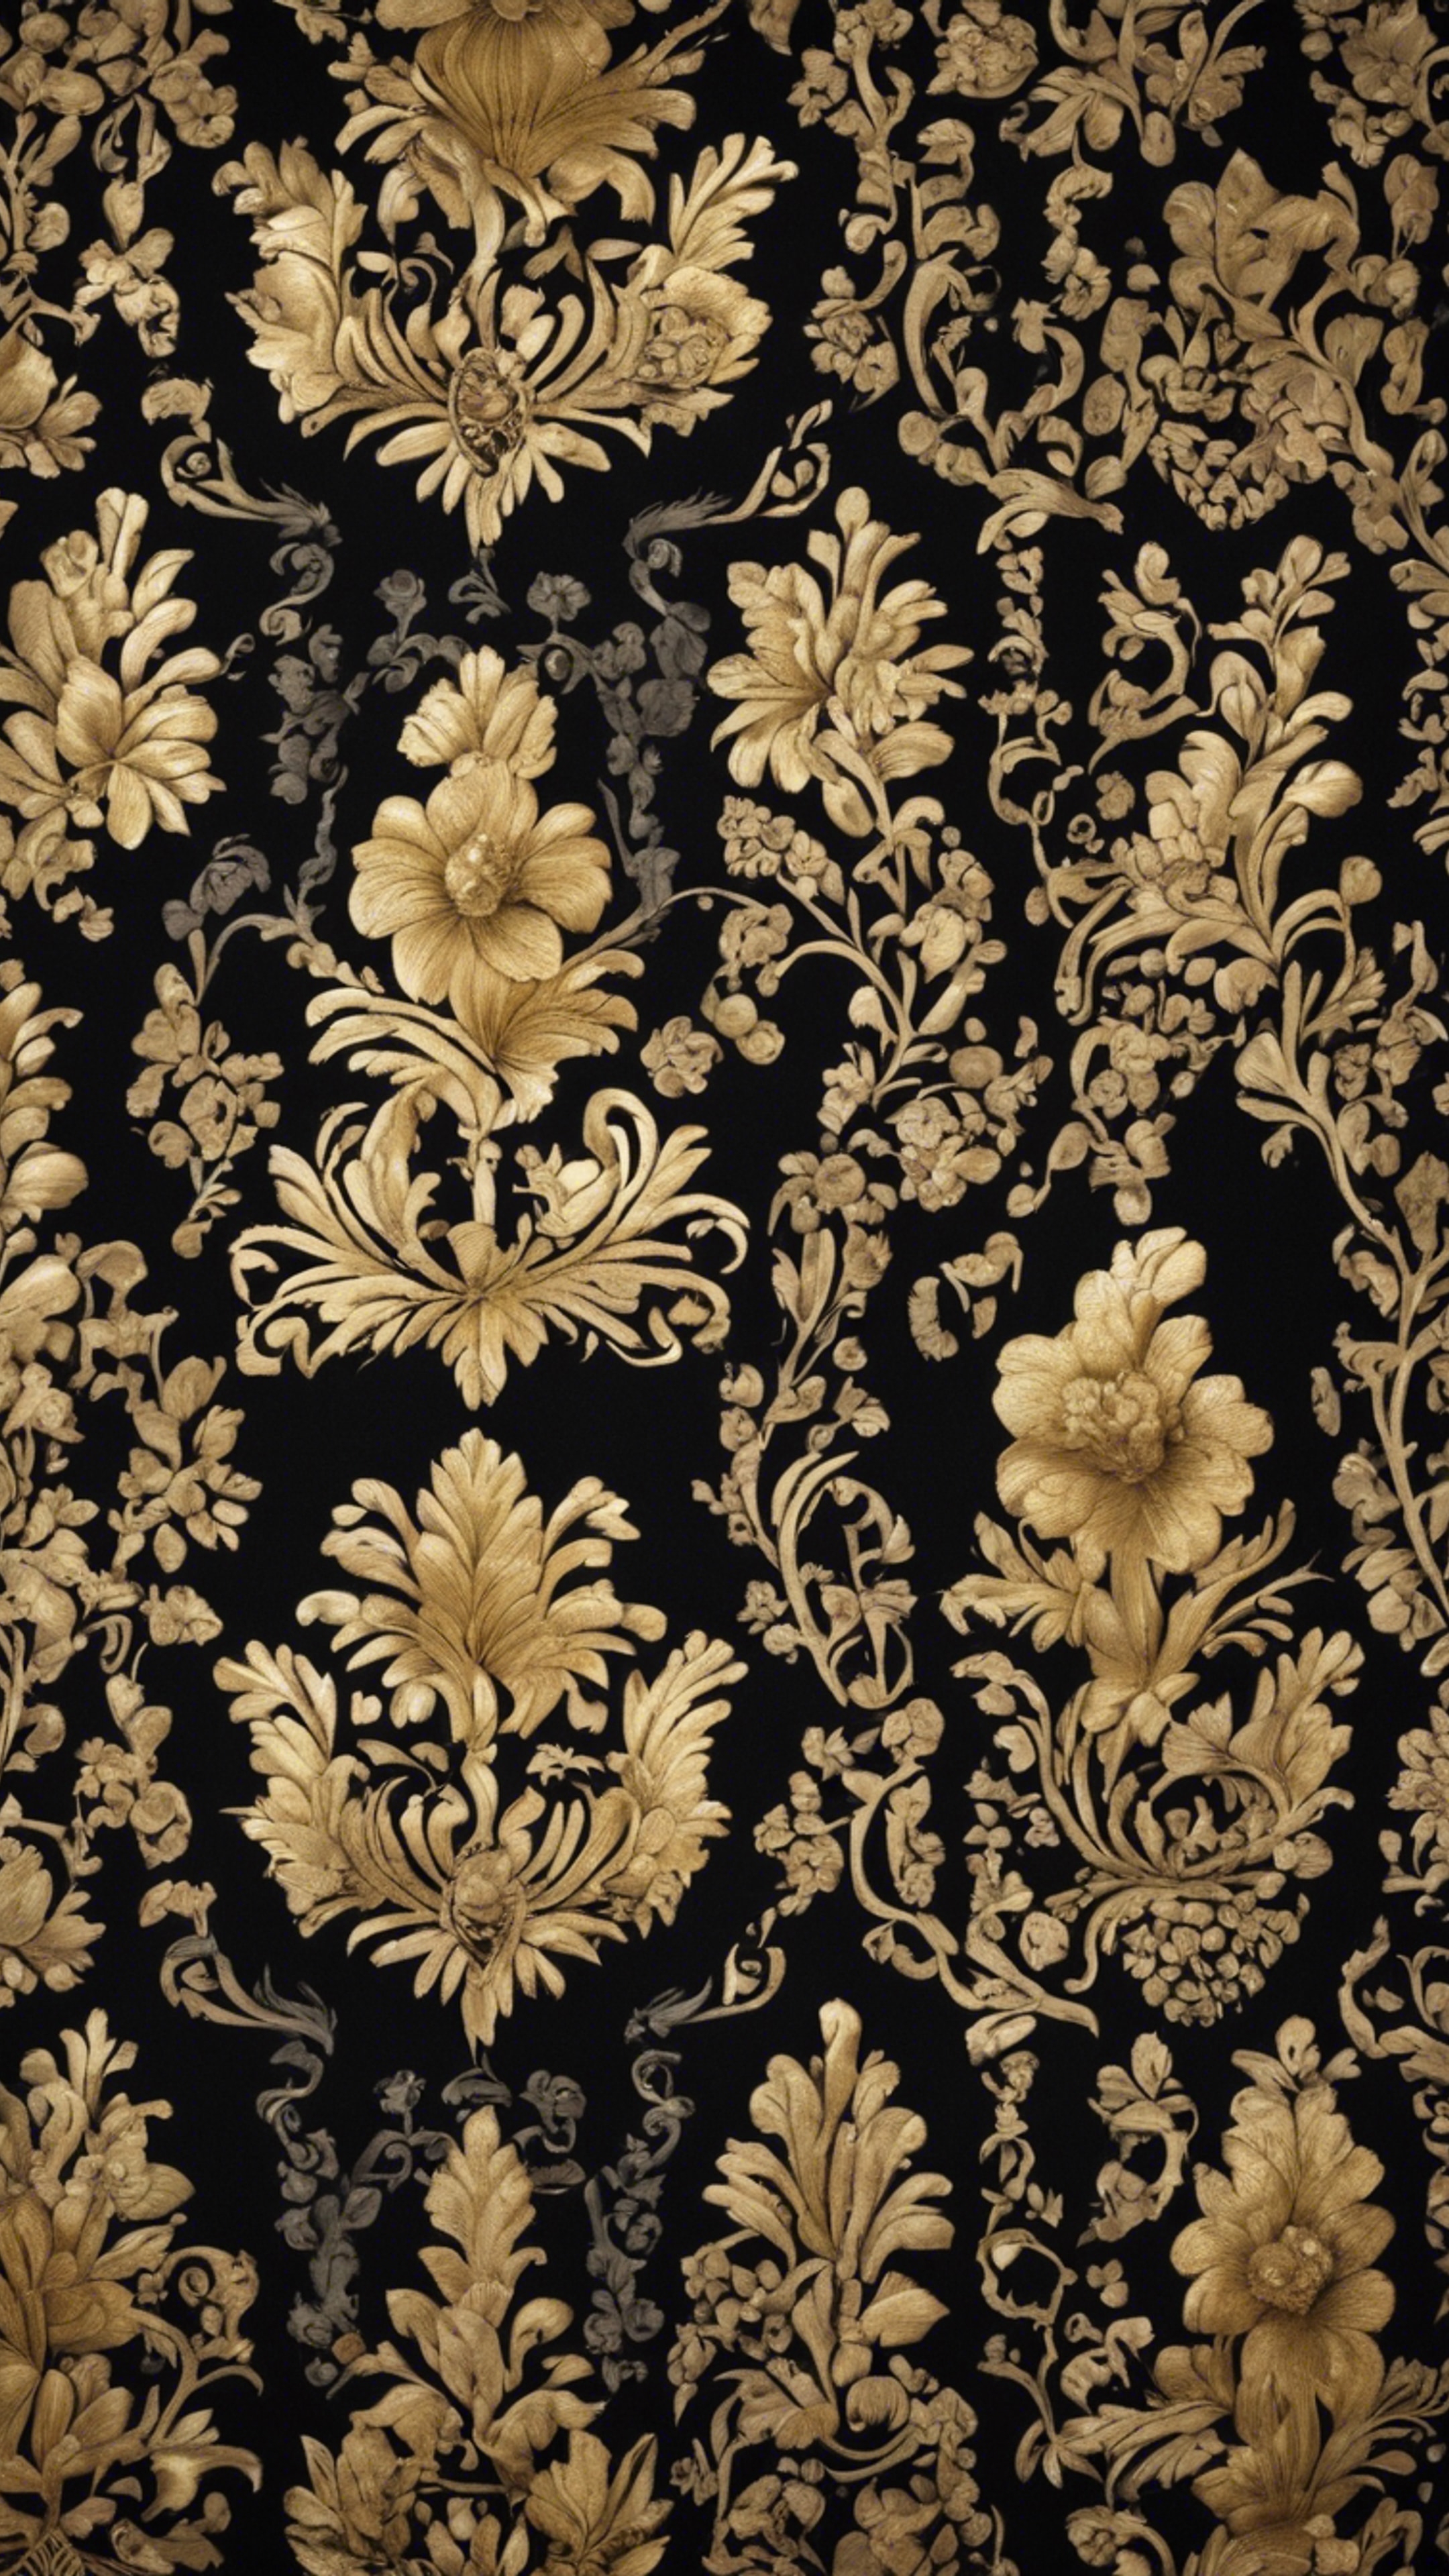 A black damask fabric with intricate floral patterns and gold accents.壁紙[1ef12402f47a47db8979]